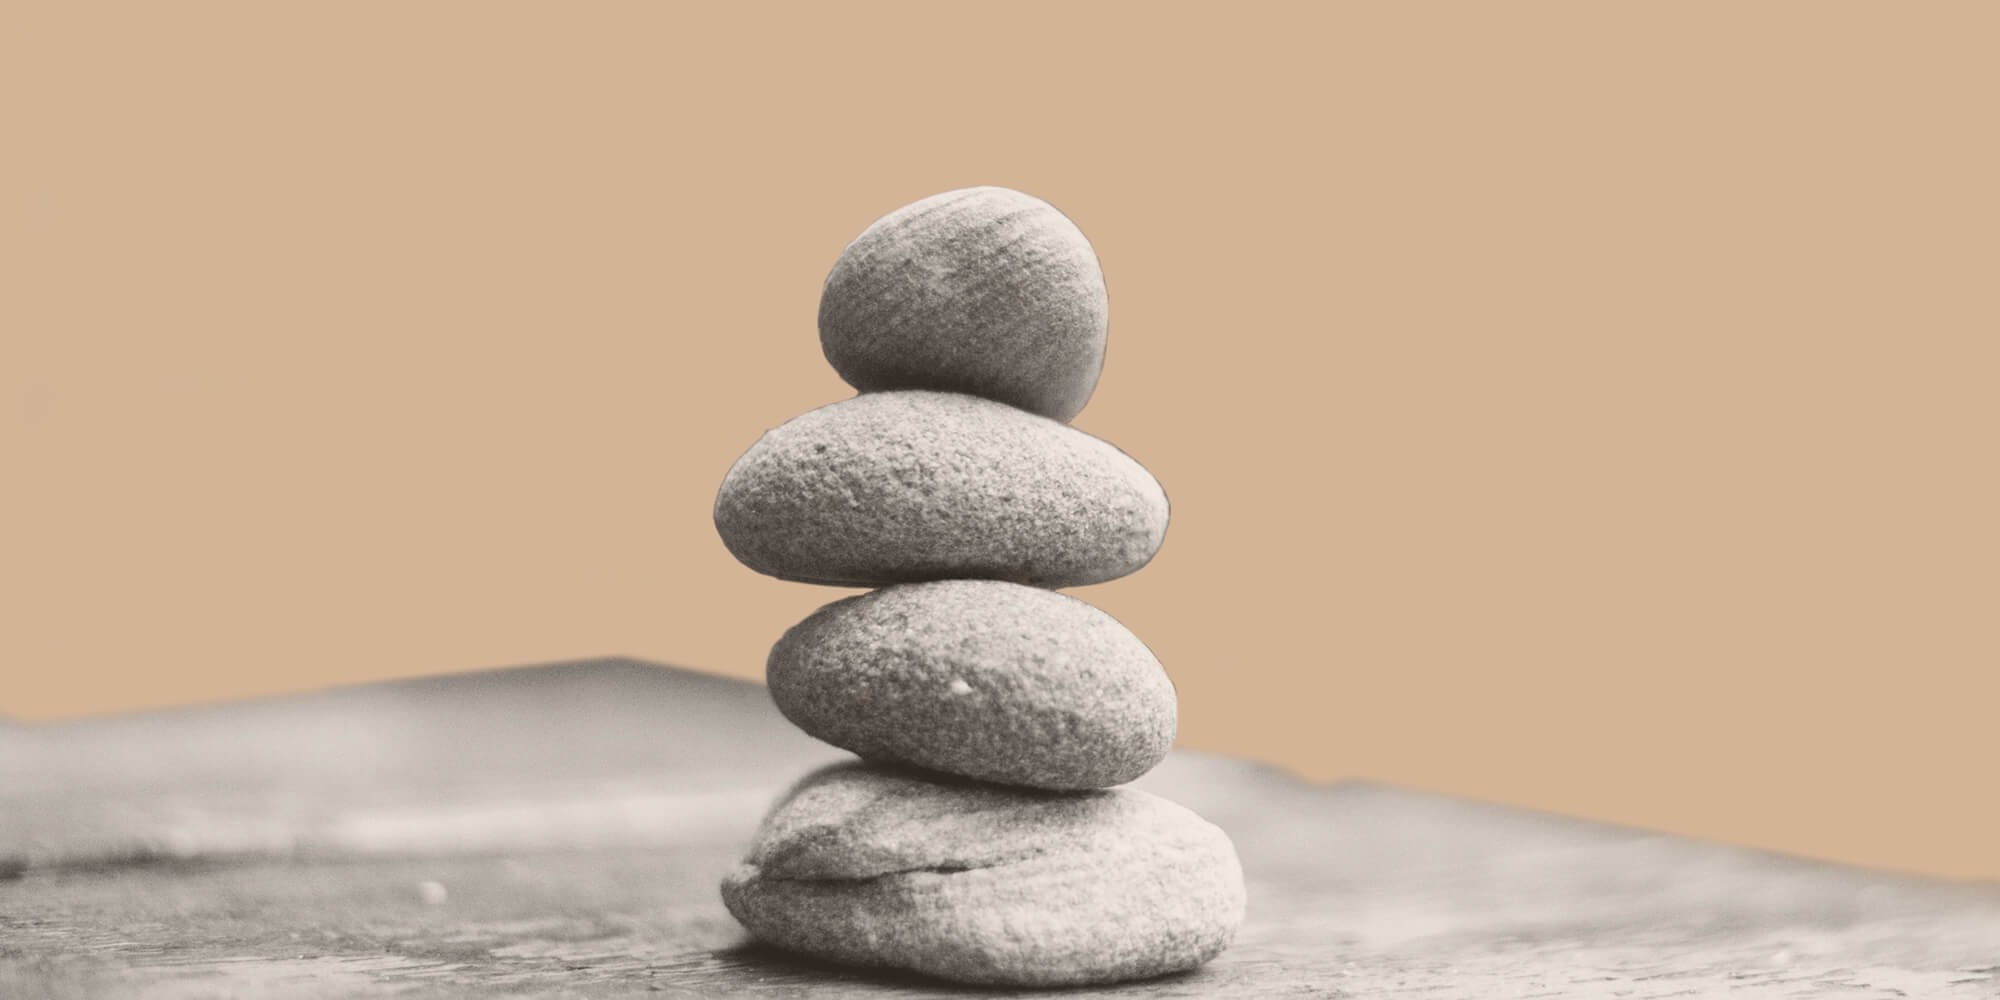 Four stones balanced atop one another. Slef-care